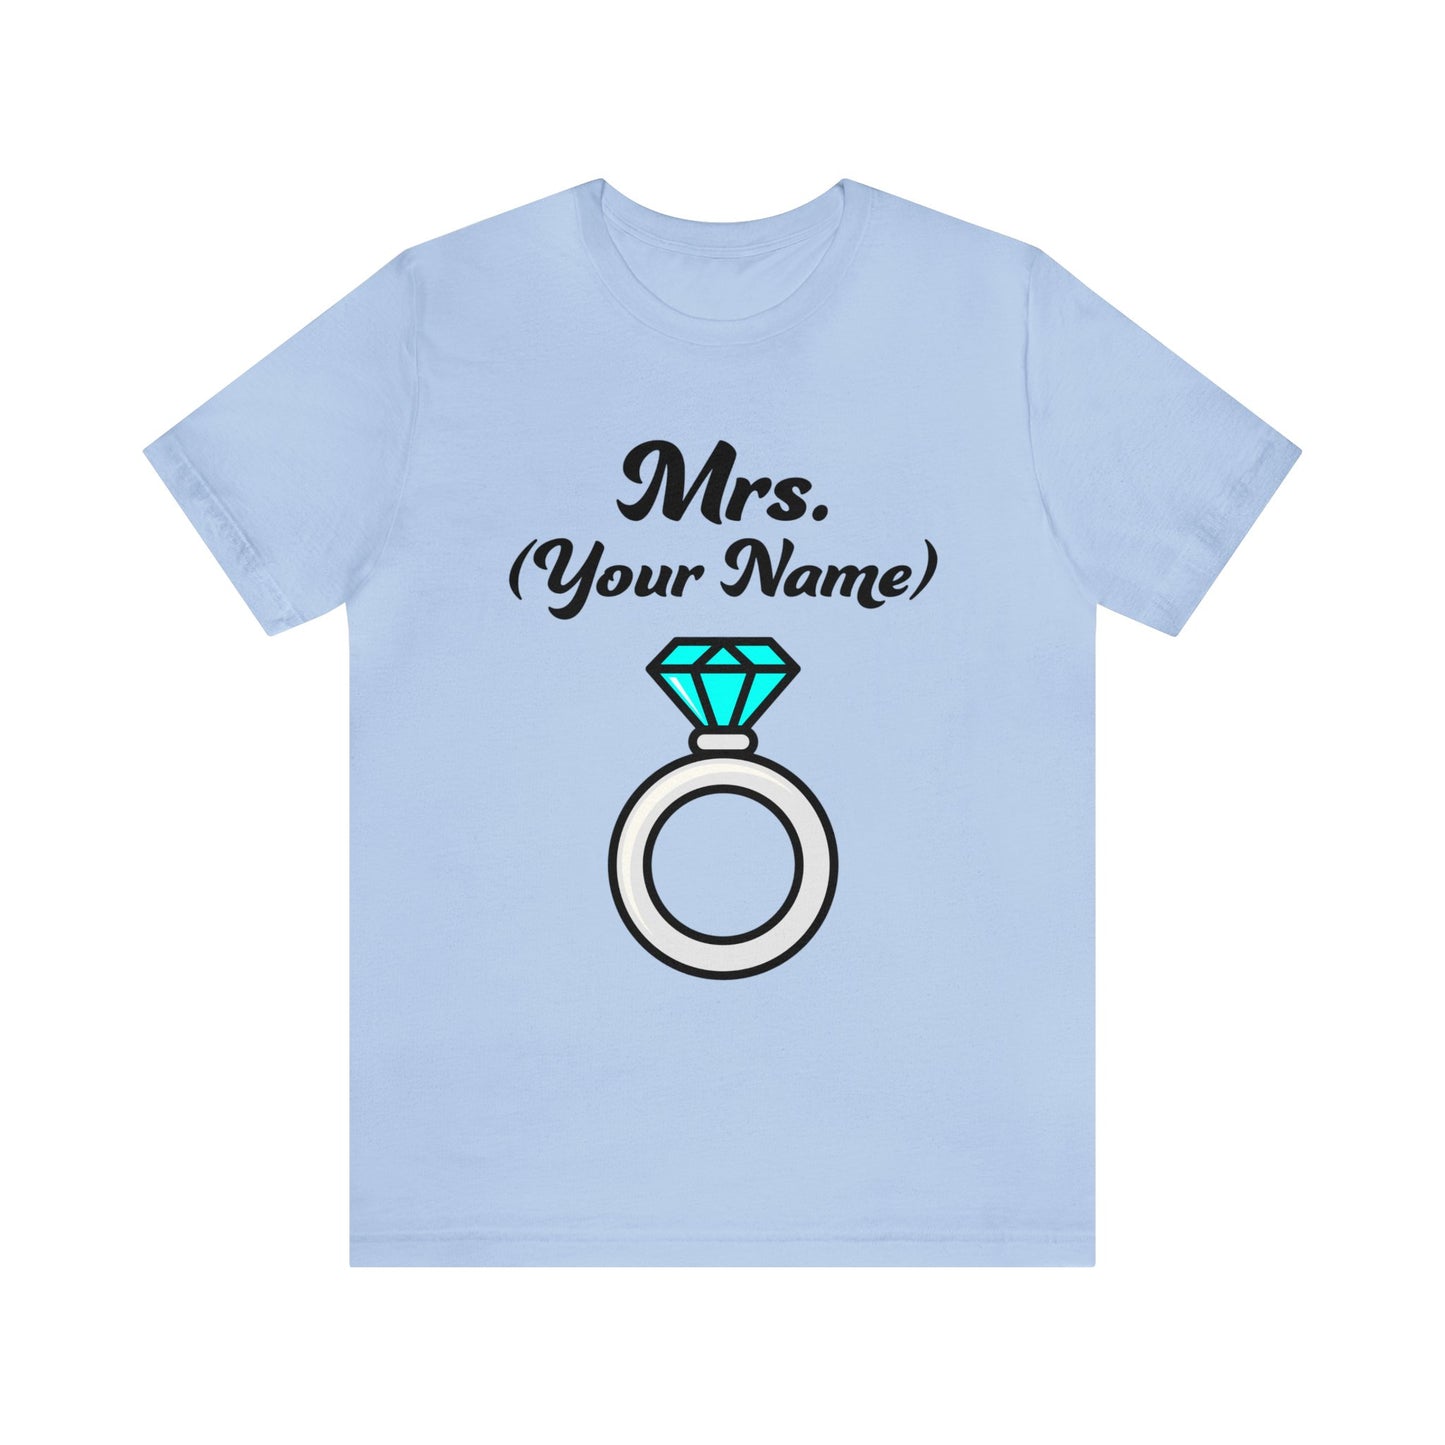 Mrs. (Your Name) Custom–Unisex Lightweight Fashion Tee–EXPRESS DELIVERY*